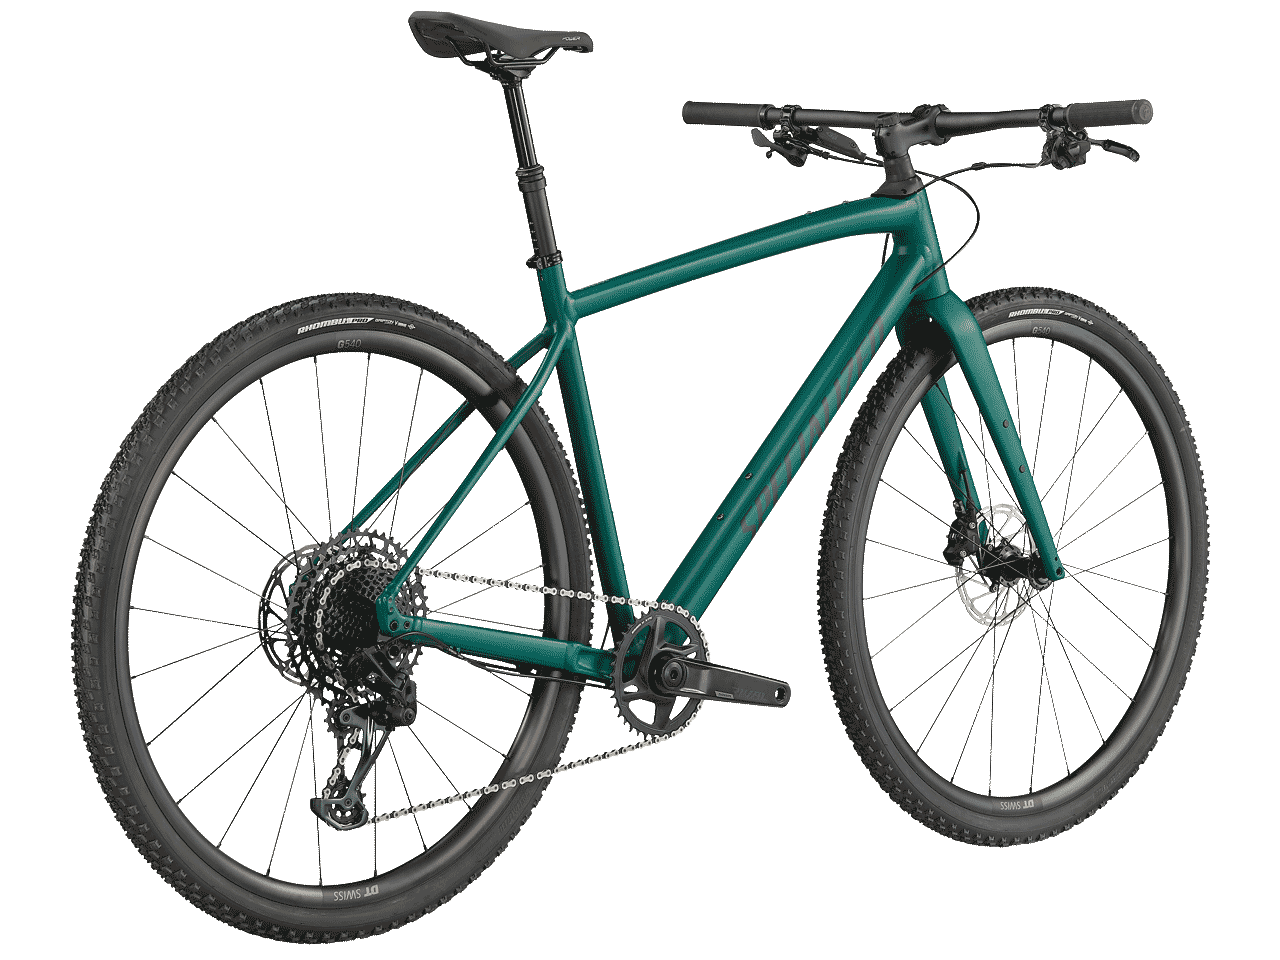 The Specialized Diverge EVO